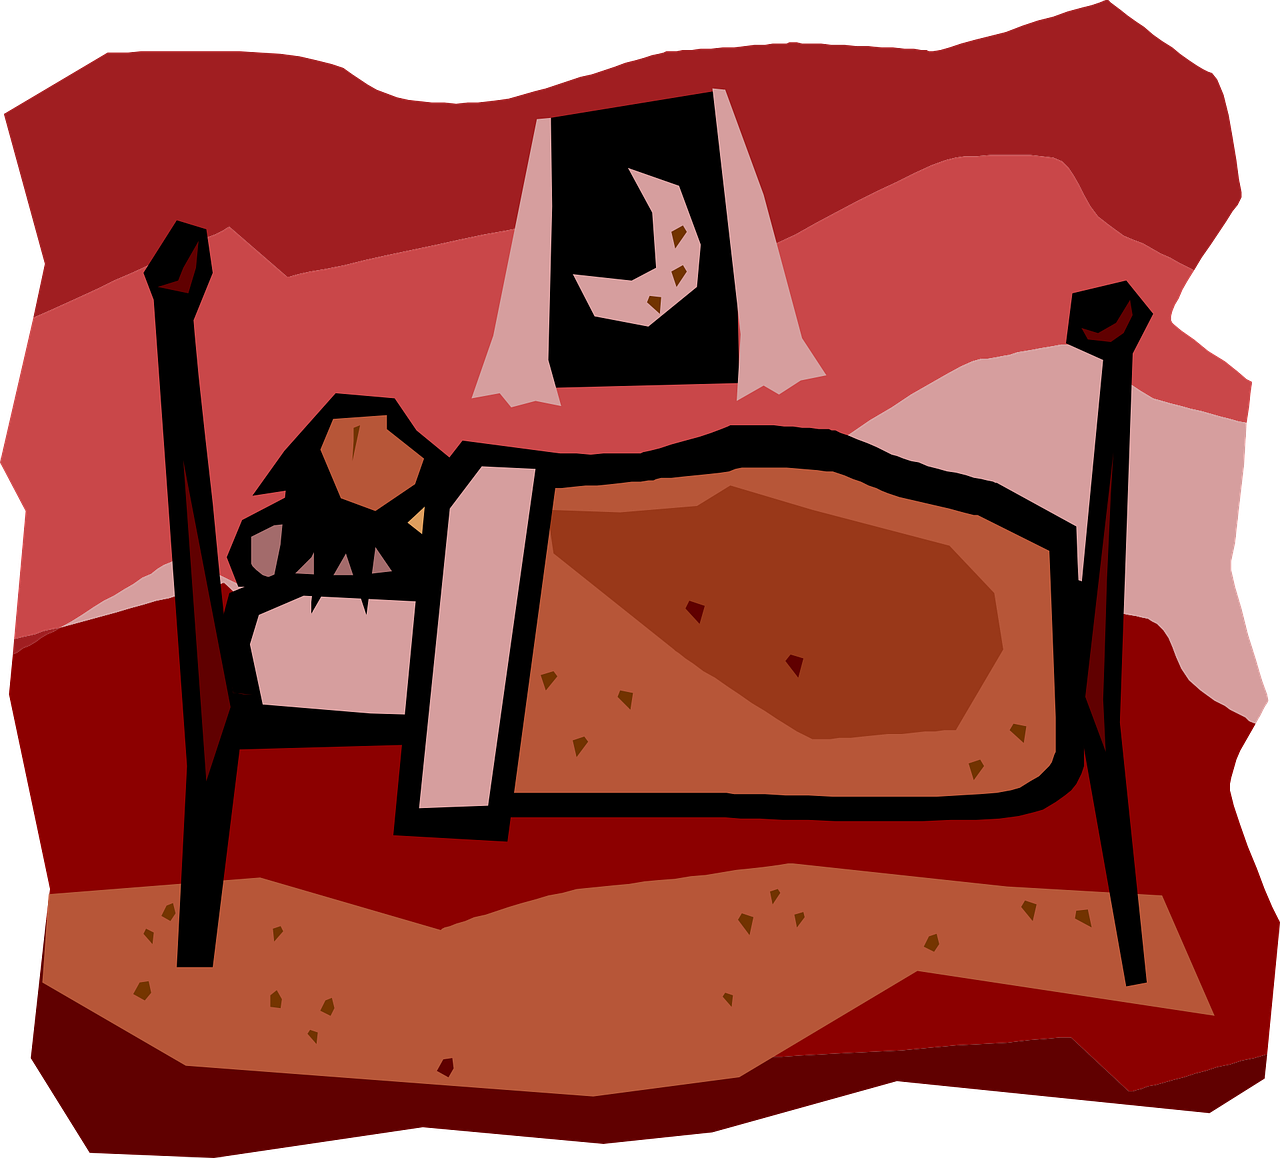 Bedtime clipart cozy bed. Why my ritual is